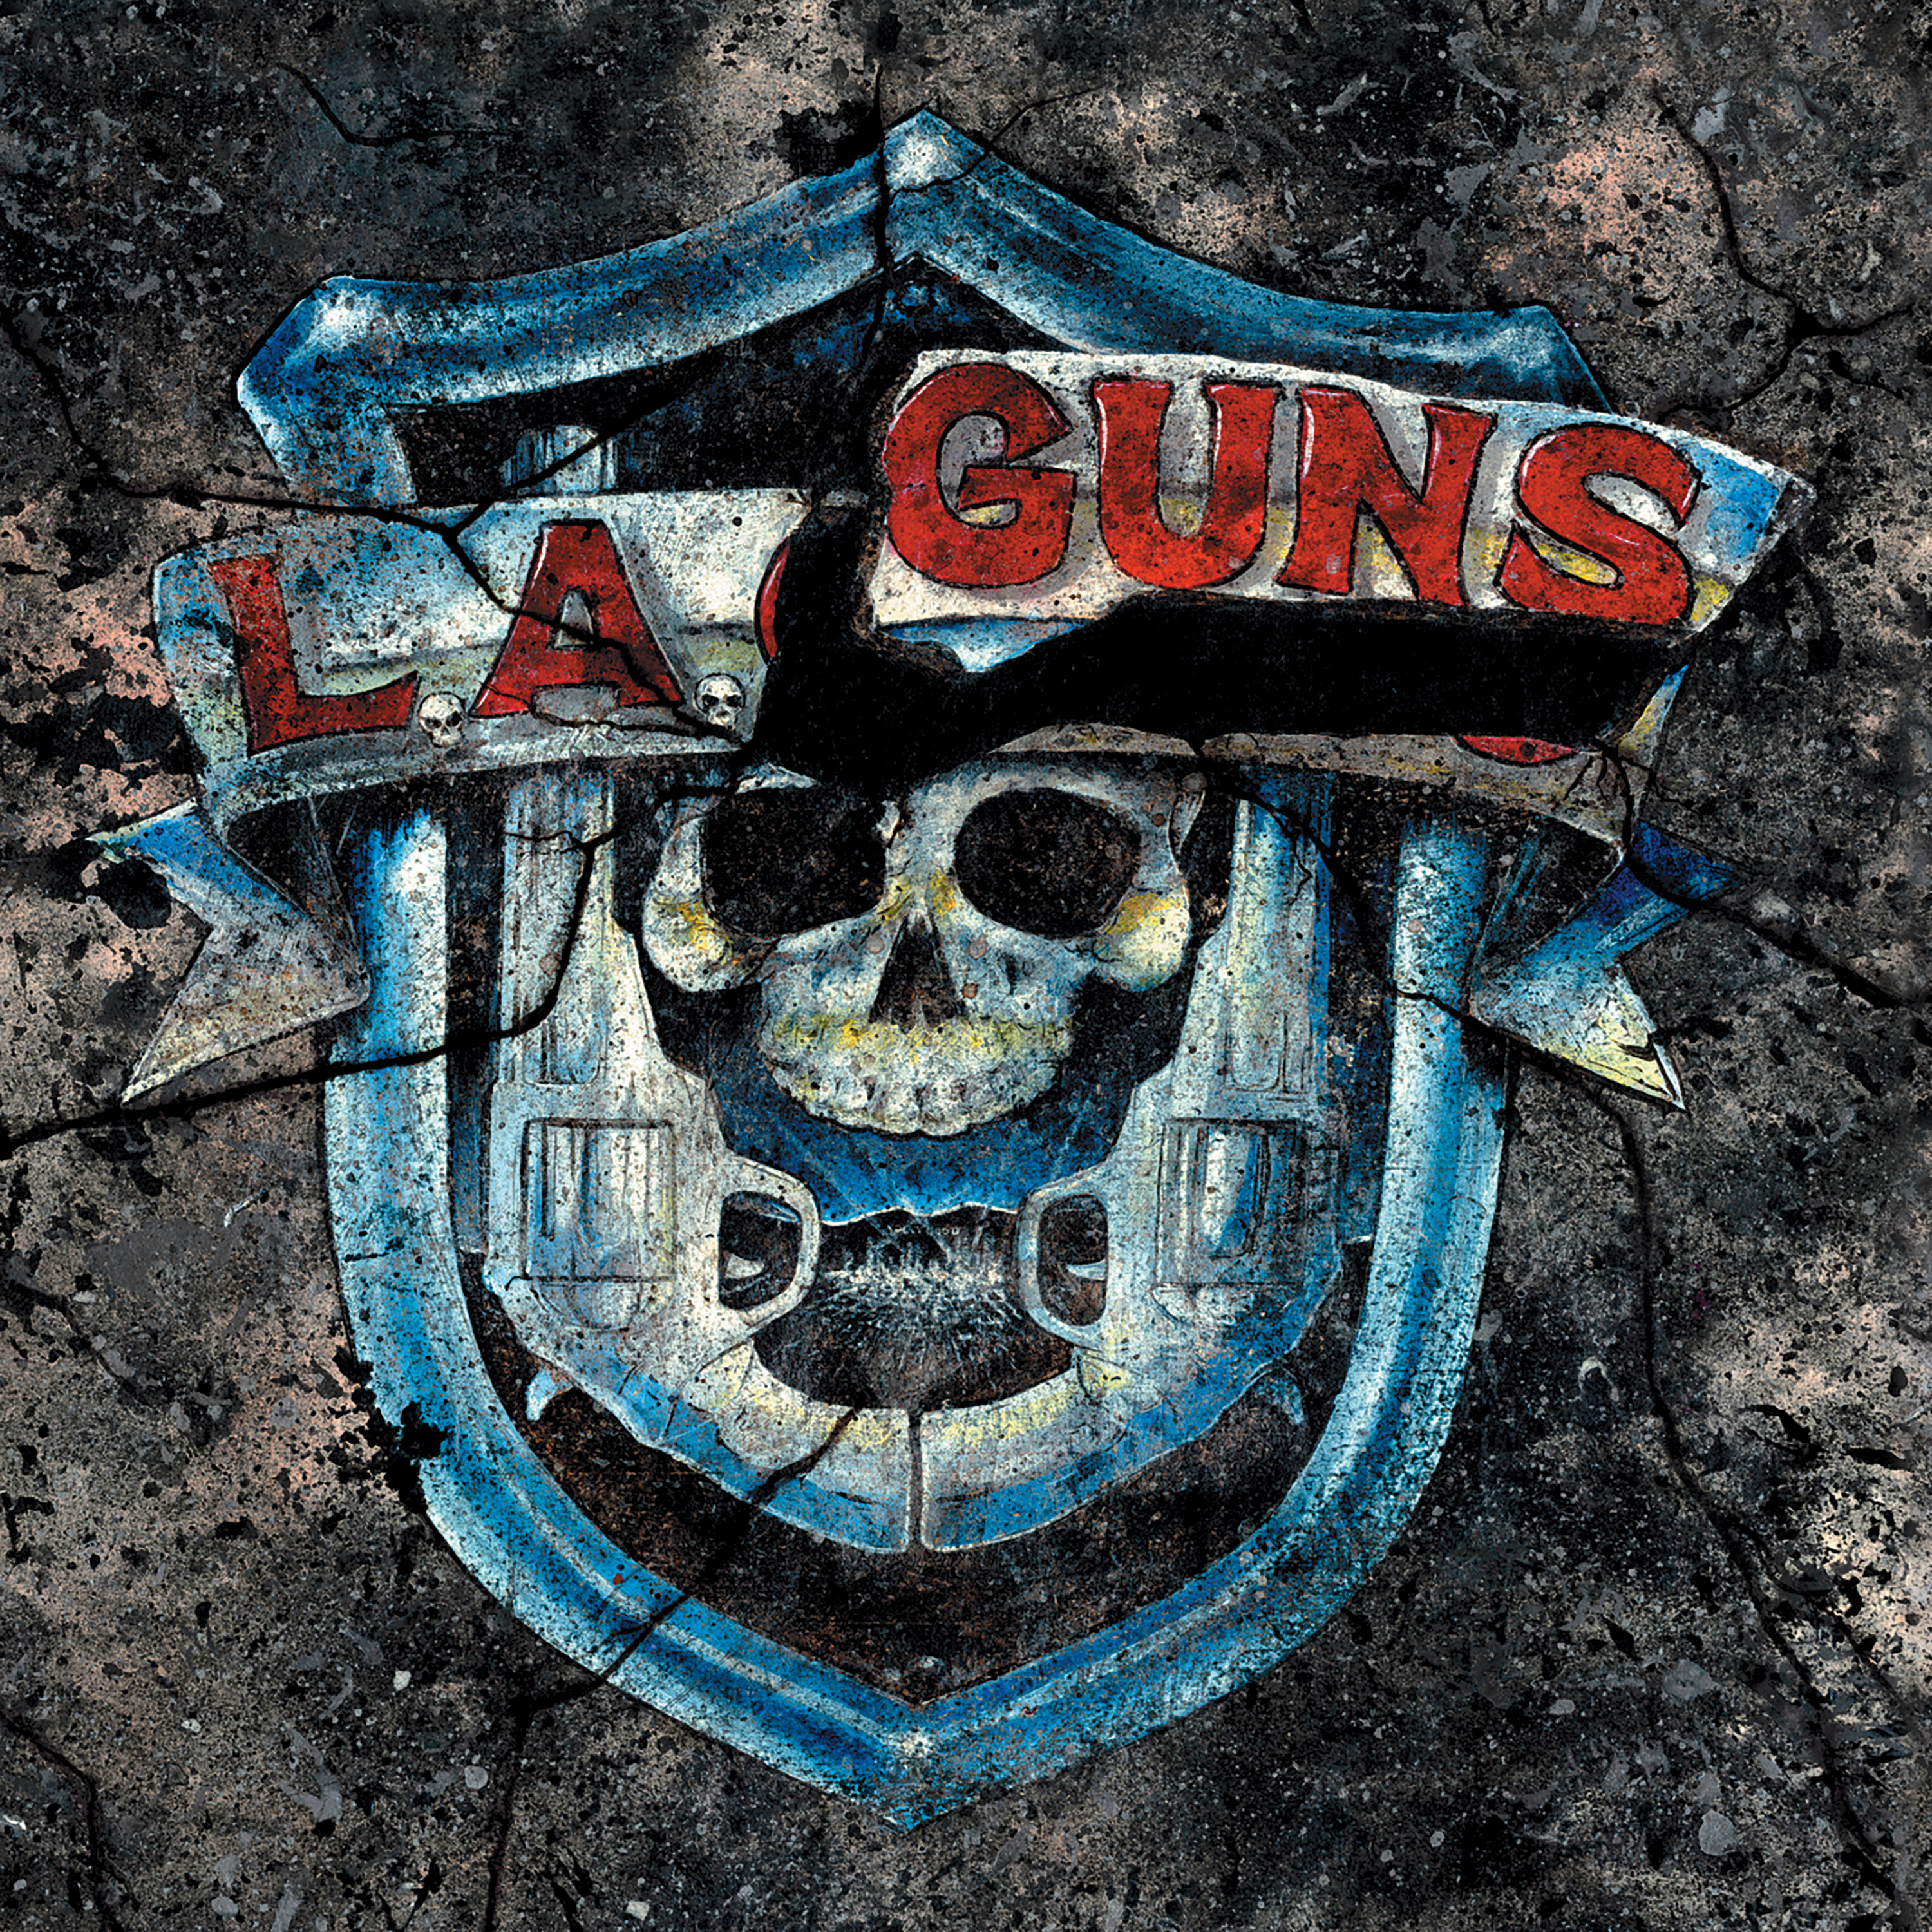 LA Guns – Tracii Guns and Phil Lewis Reunite for The Missing Peace!